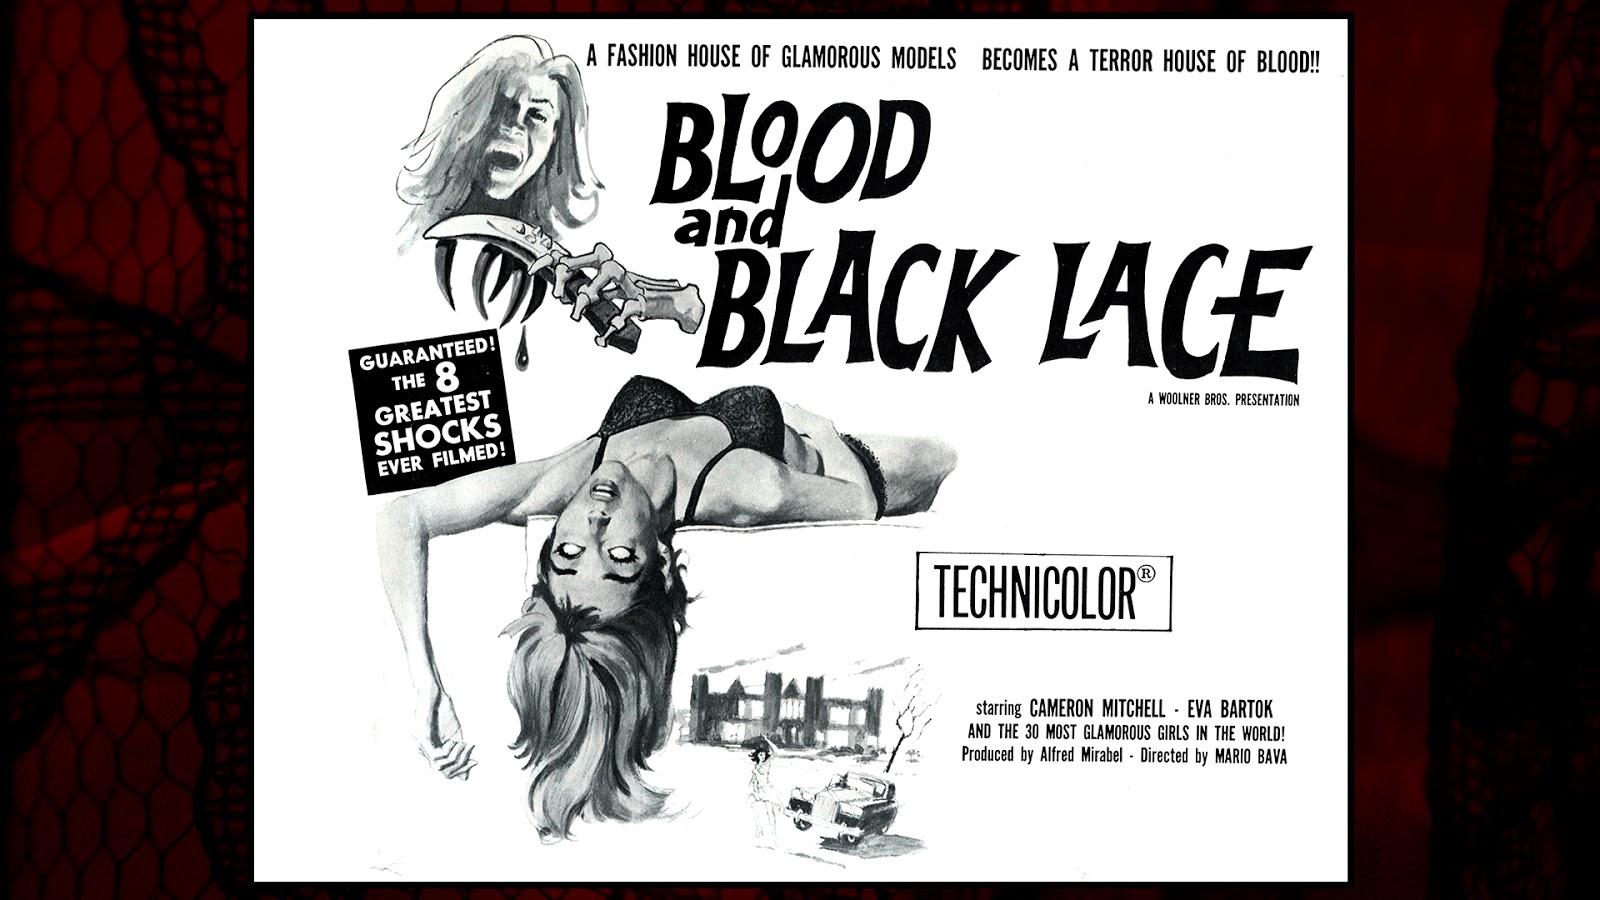  Blood and Black Lace (2-Disc Special Edition) [Blu-ray + DVD] :  Cameron Mitchell, Eva Bartok, Thomas Reiner, Diana DiPaolo, Luciano  Piggozi, Mario Bava: Movies & TV